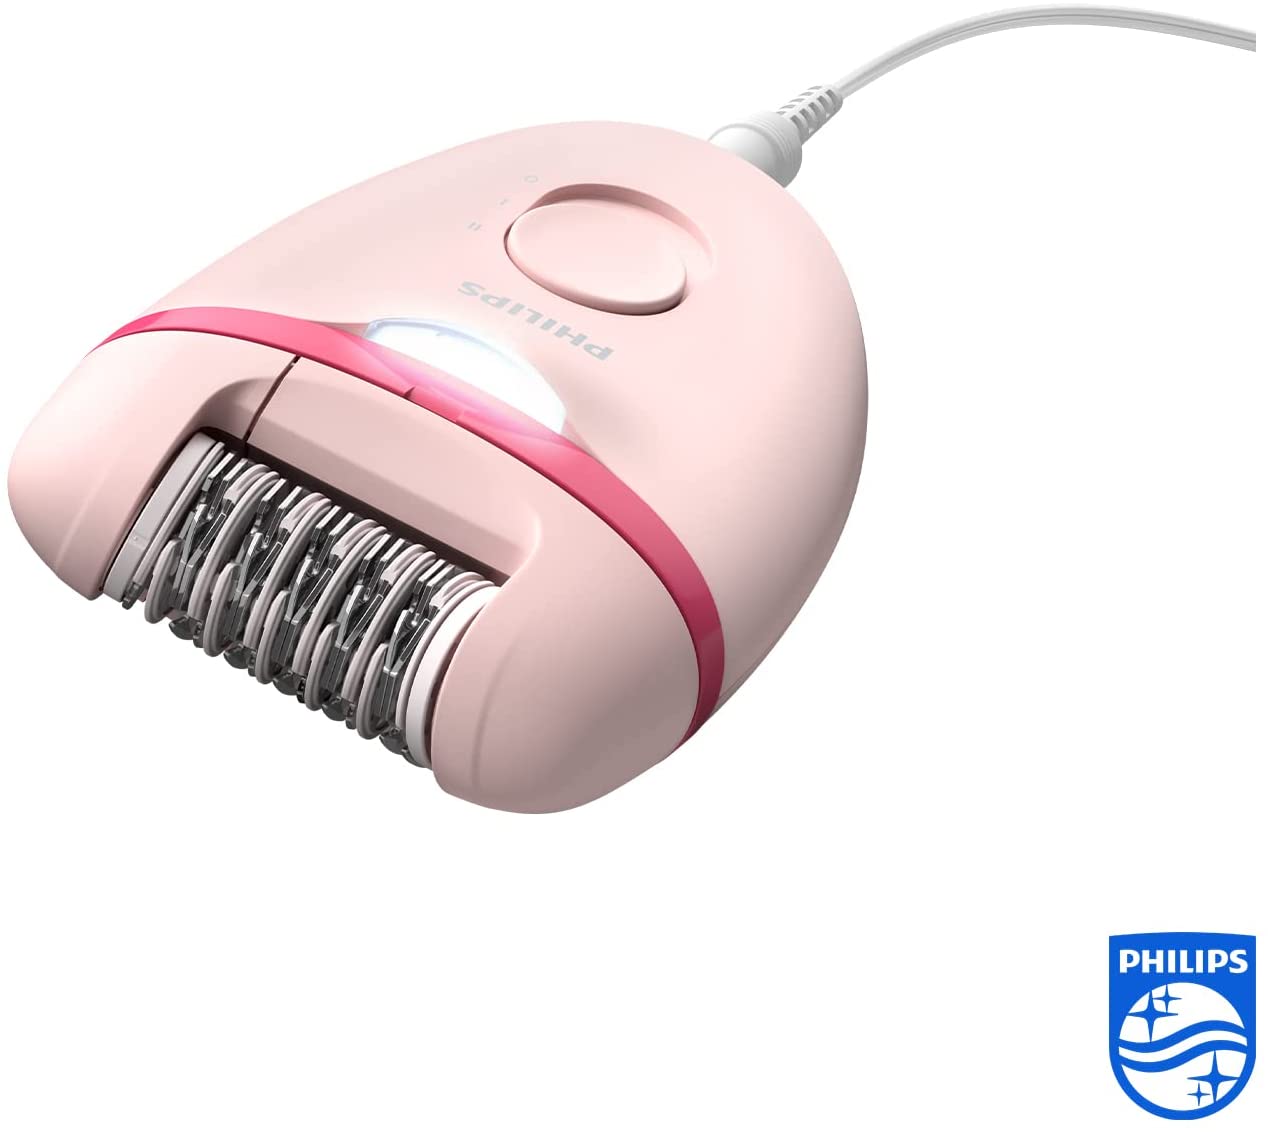 Philips Satinelle Essential epilator set BRP531/00 Smooth skin for weeks 2 speed settings mini epilator for sensitive areas tweezers for fine corrections pink/white.